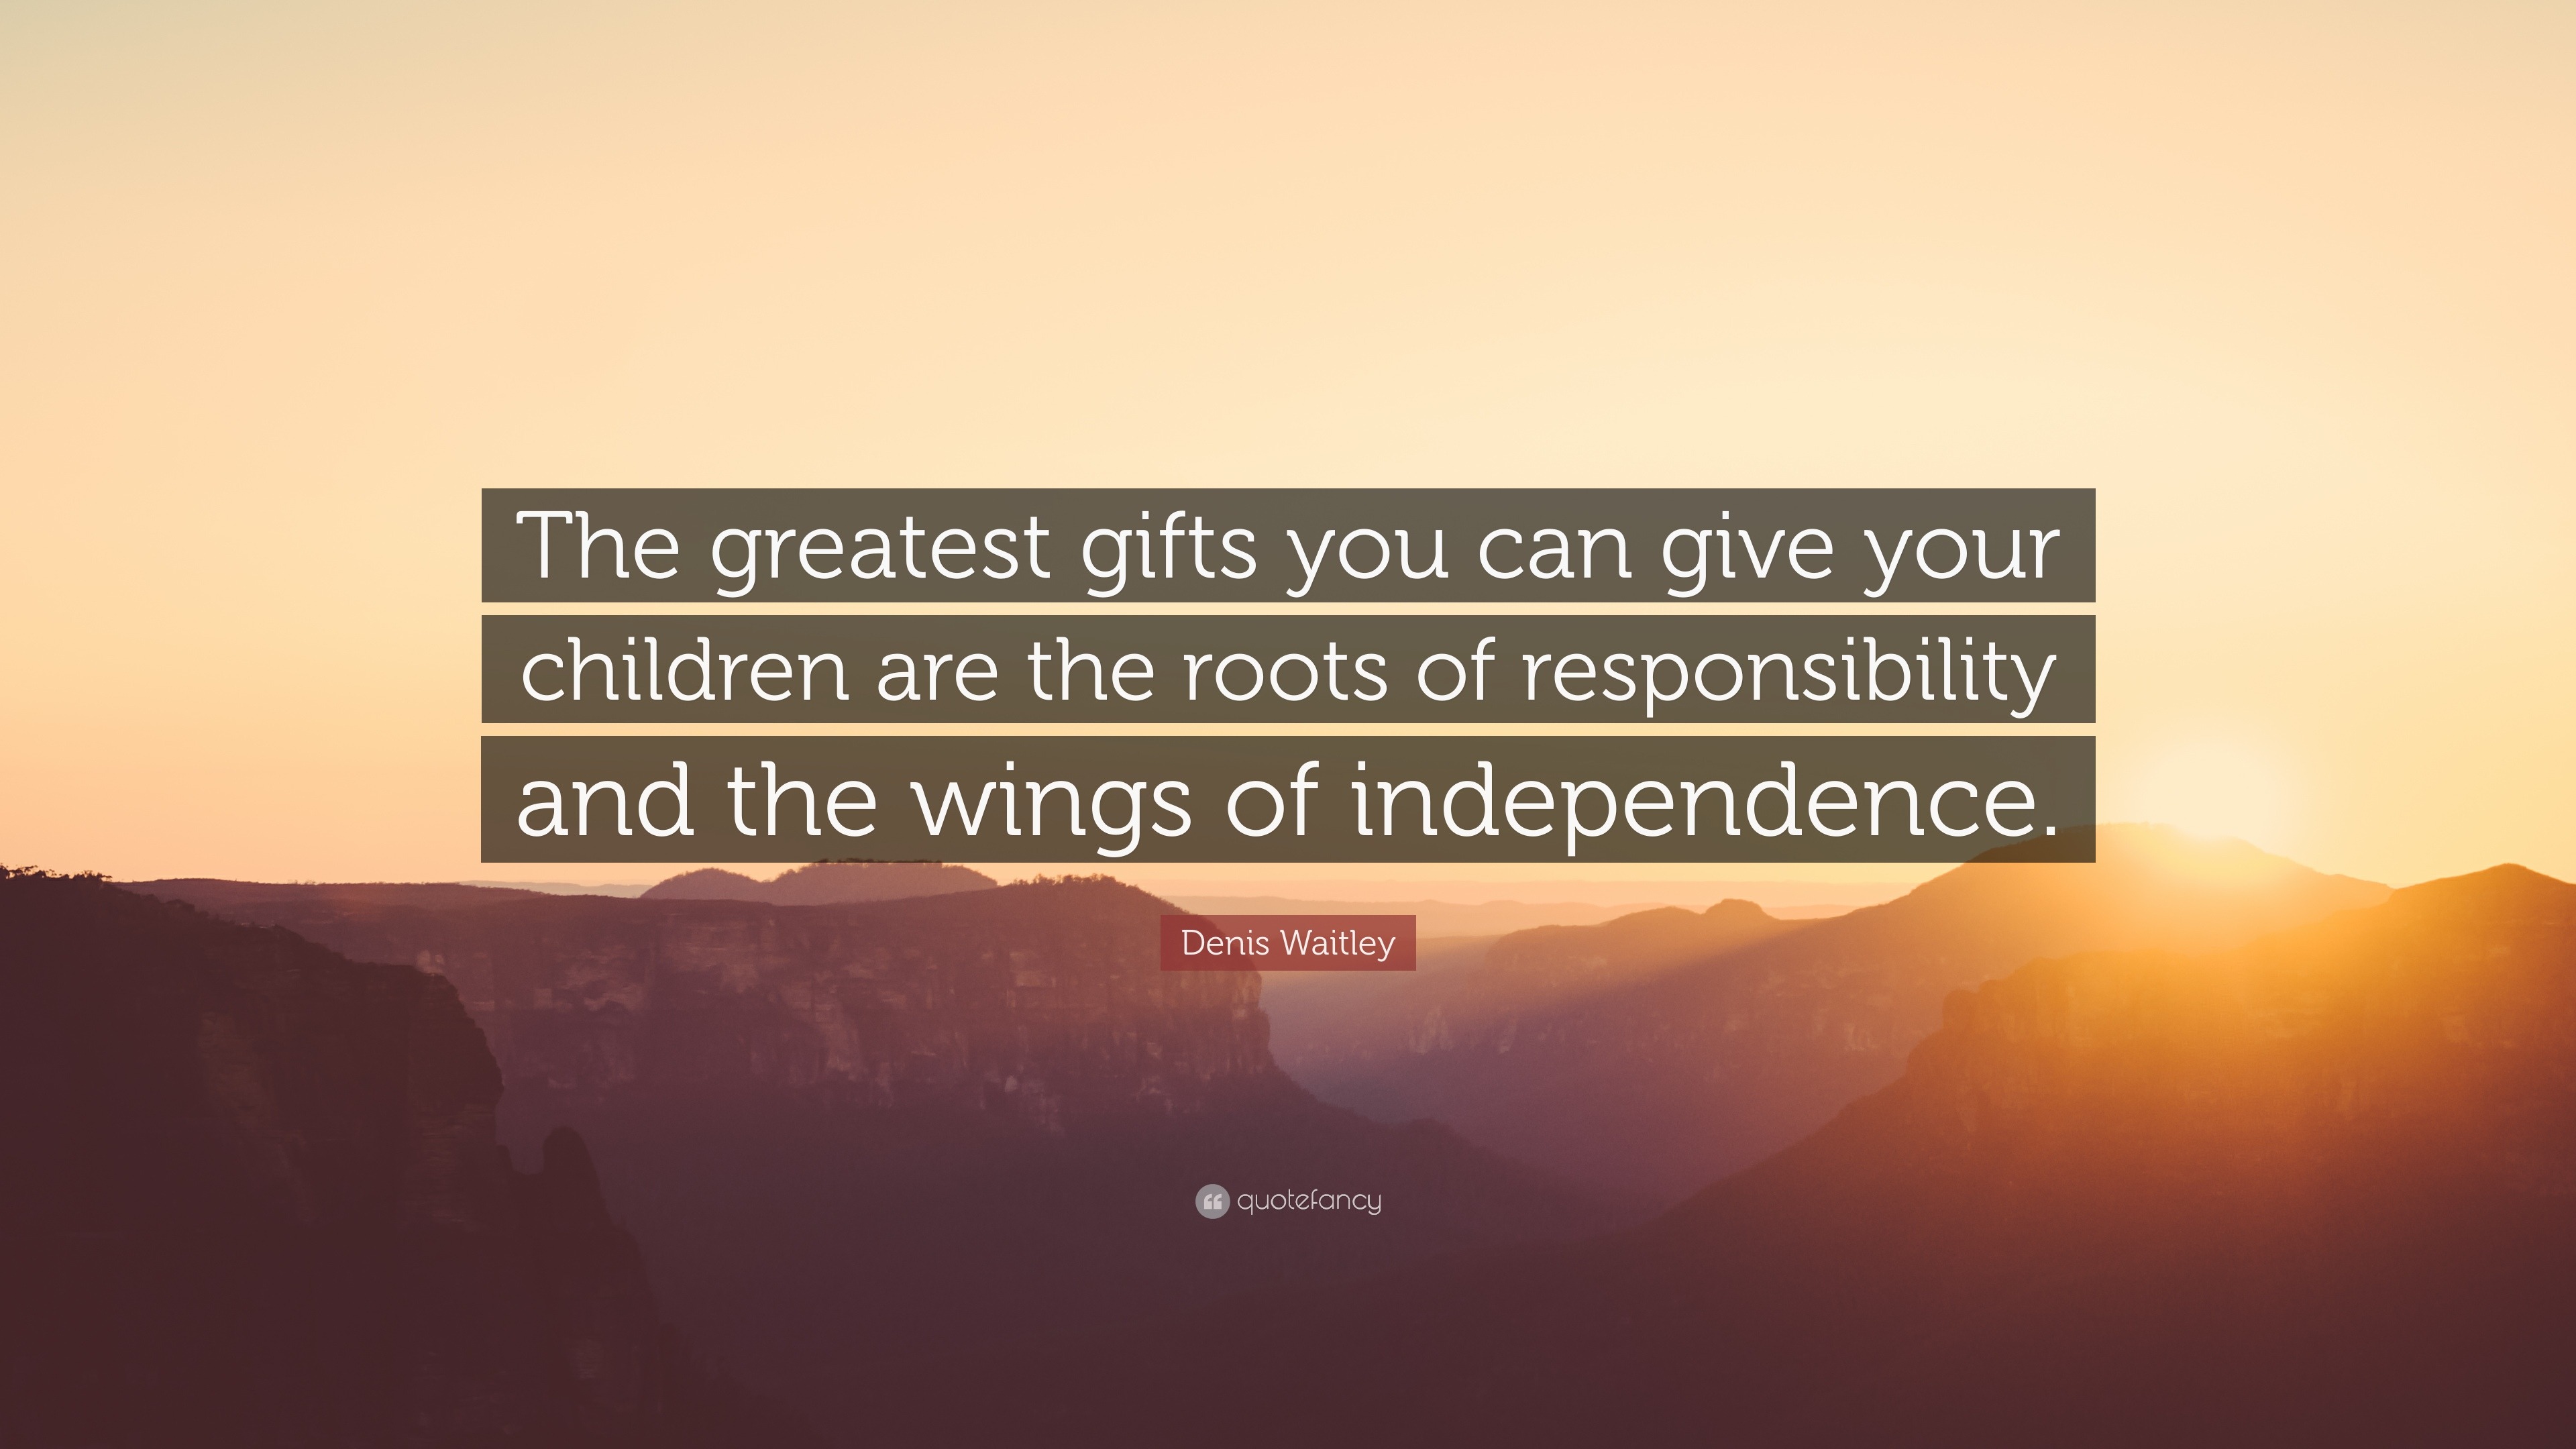 Denis Waitley Quote: “The greatest gifts you can give your children are